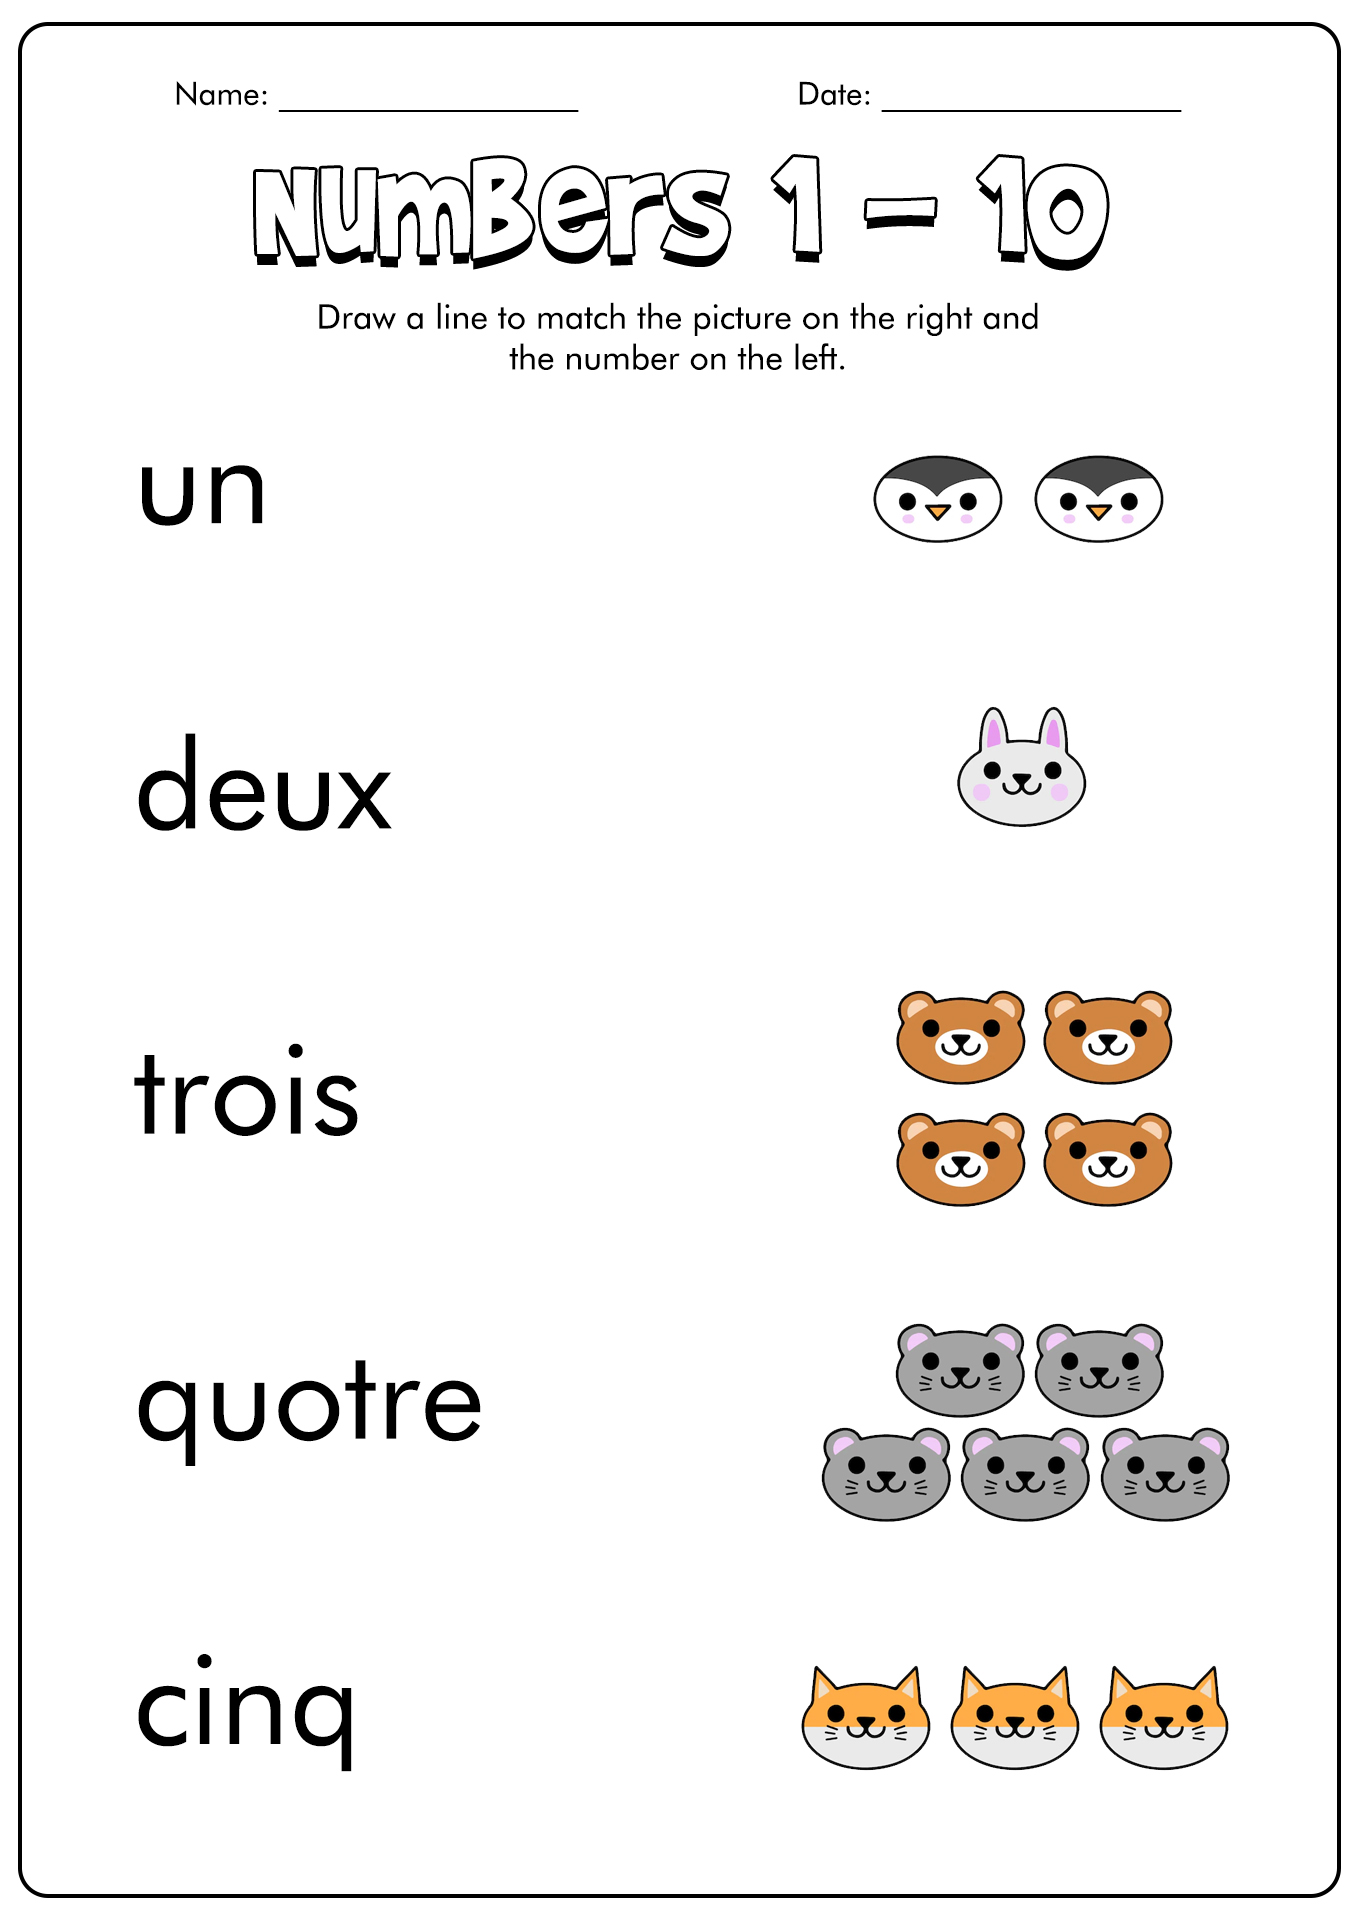 11 Best Images of Beginner French Worksheets - Free Printable French ...